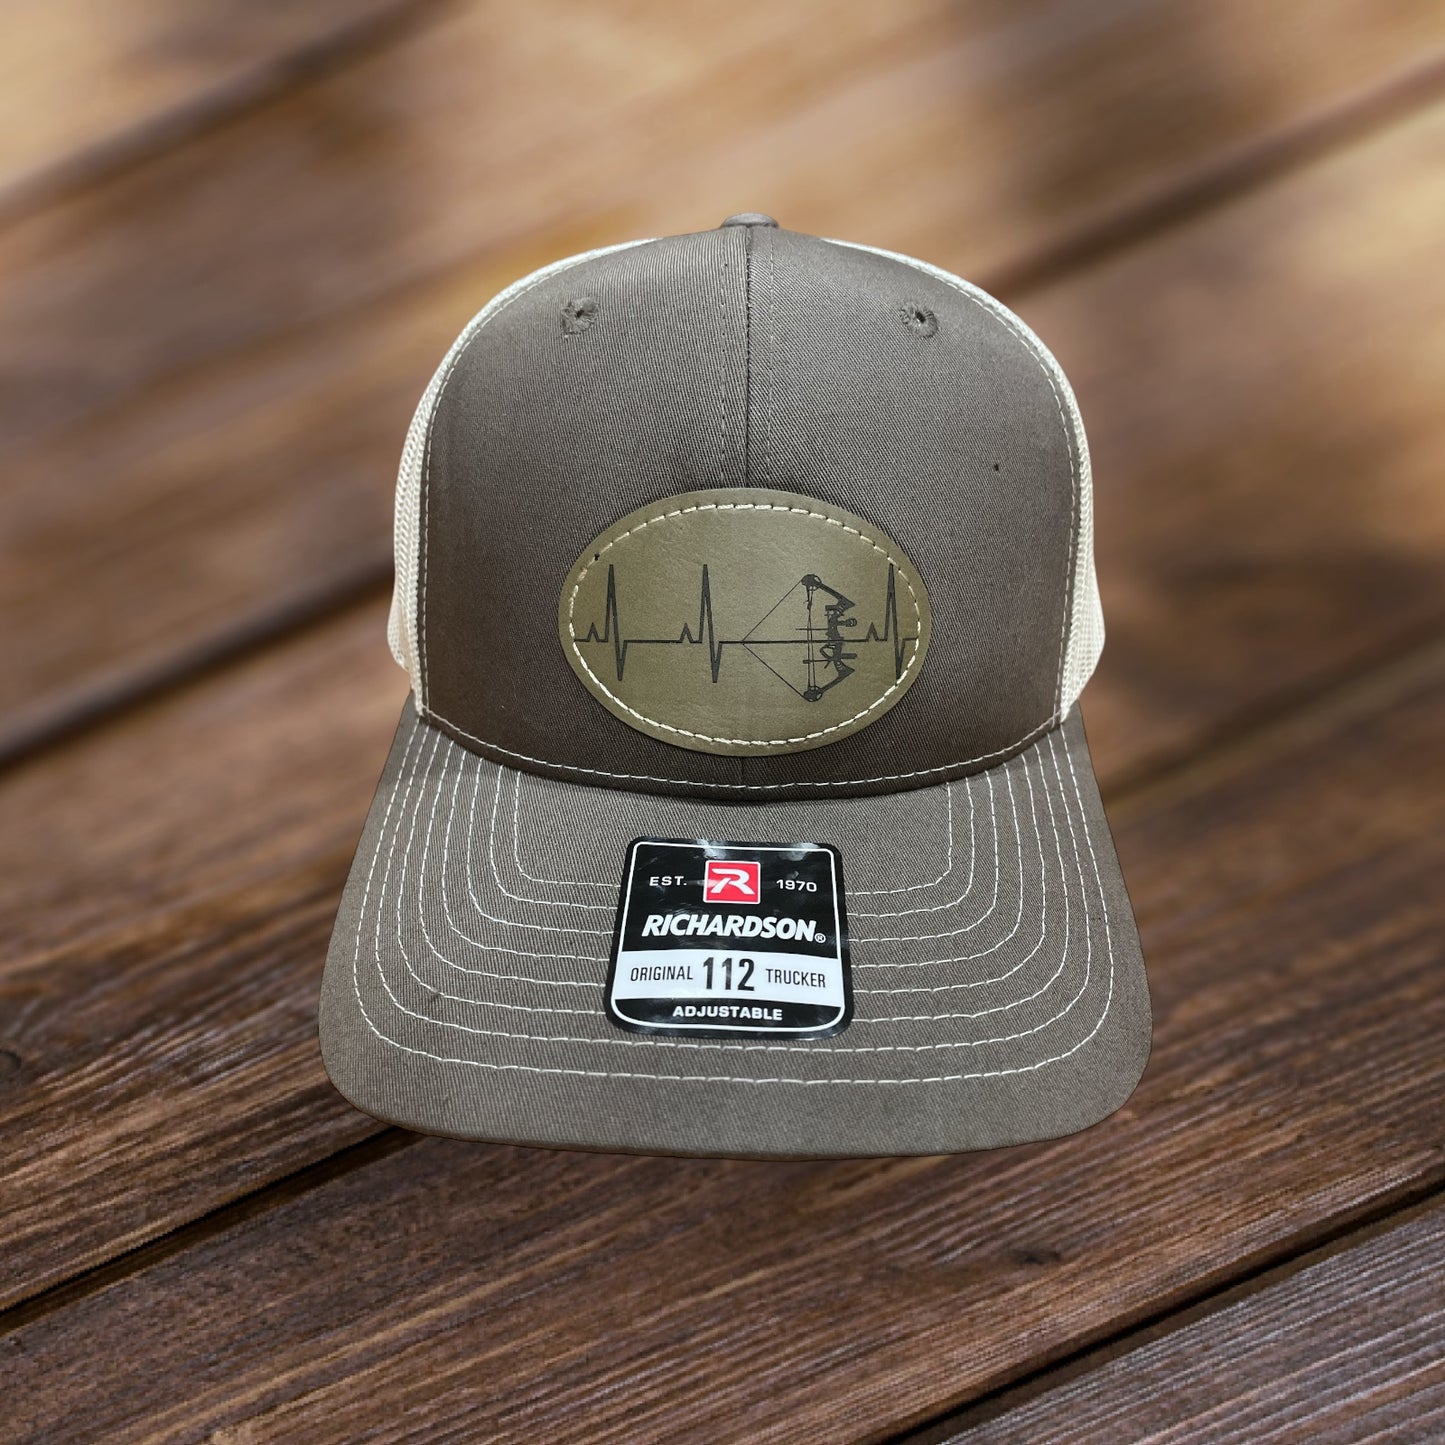 Heart of a Bow Hunter, Leather Style Patch Hat